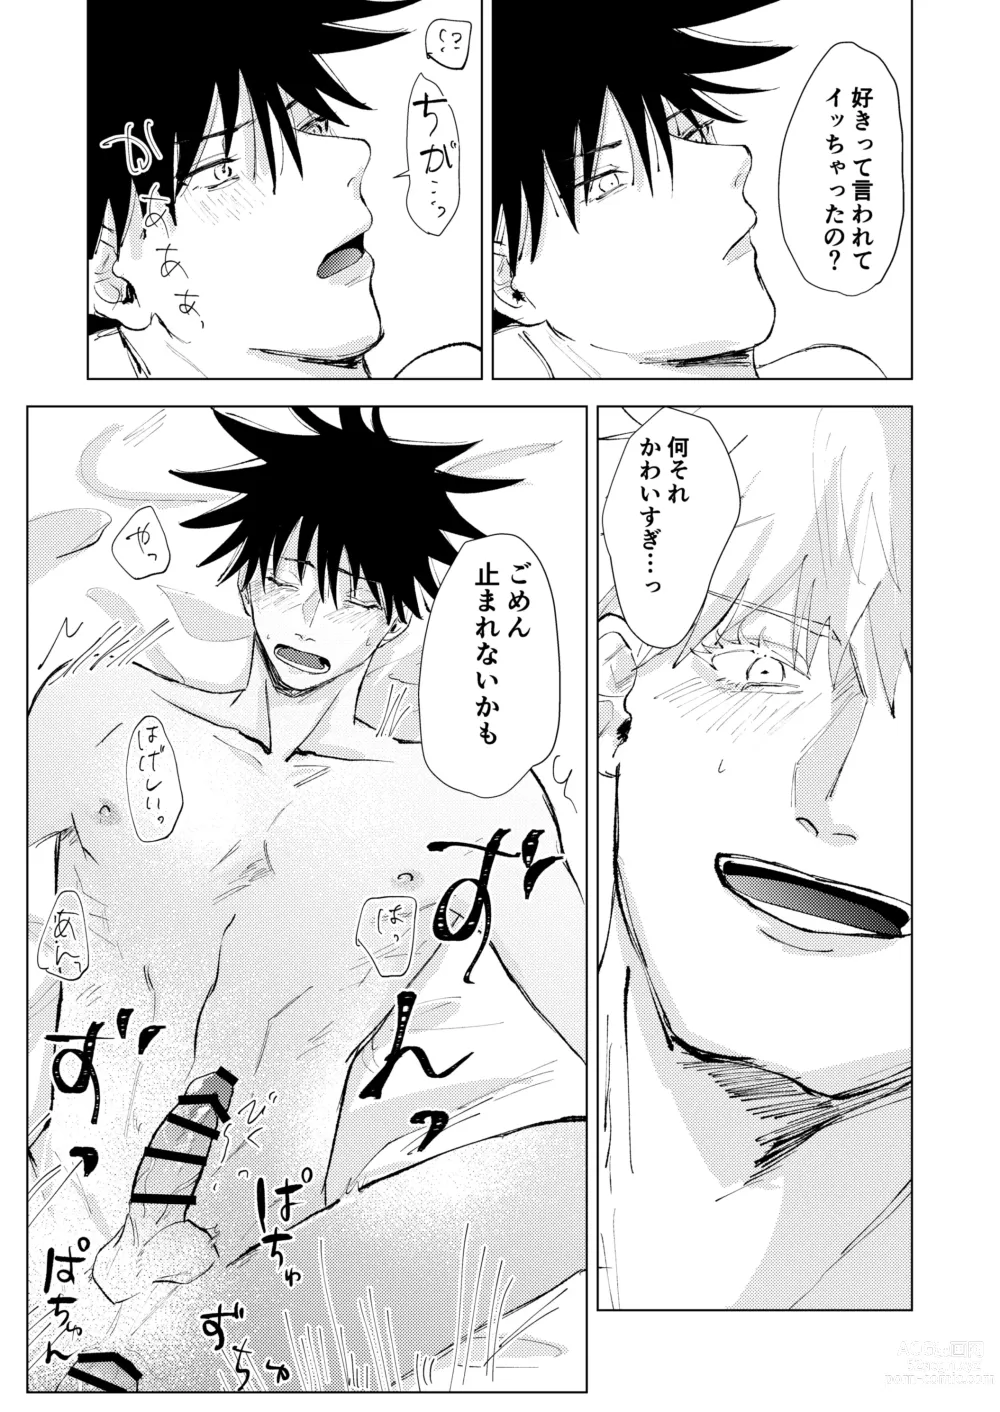 Page 32 of doujinshi Lack of...